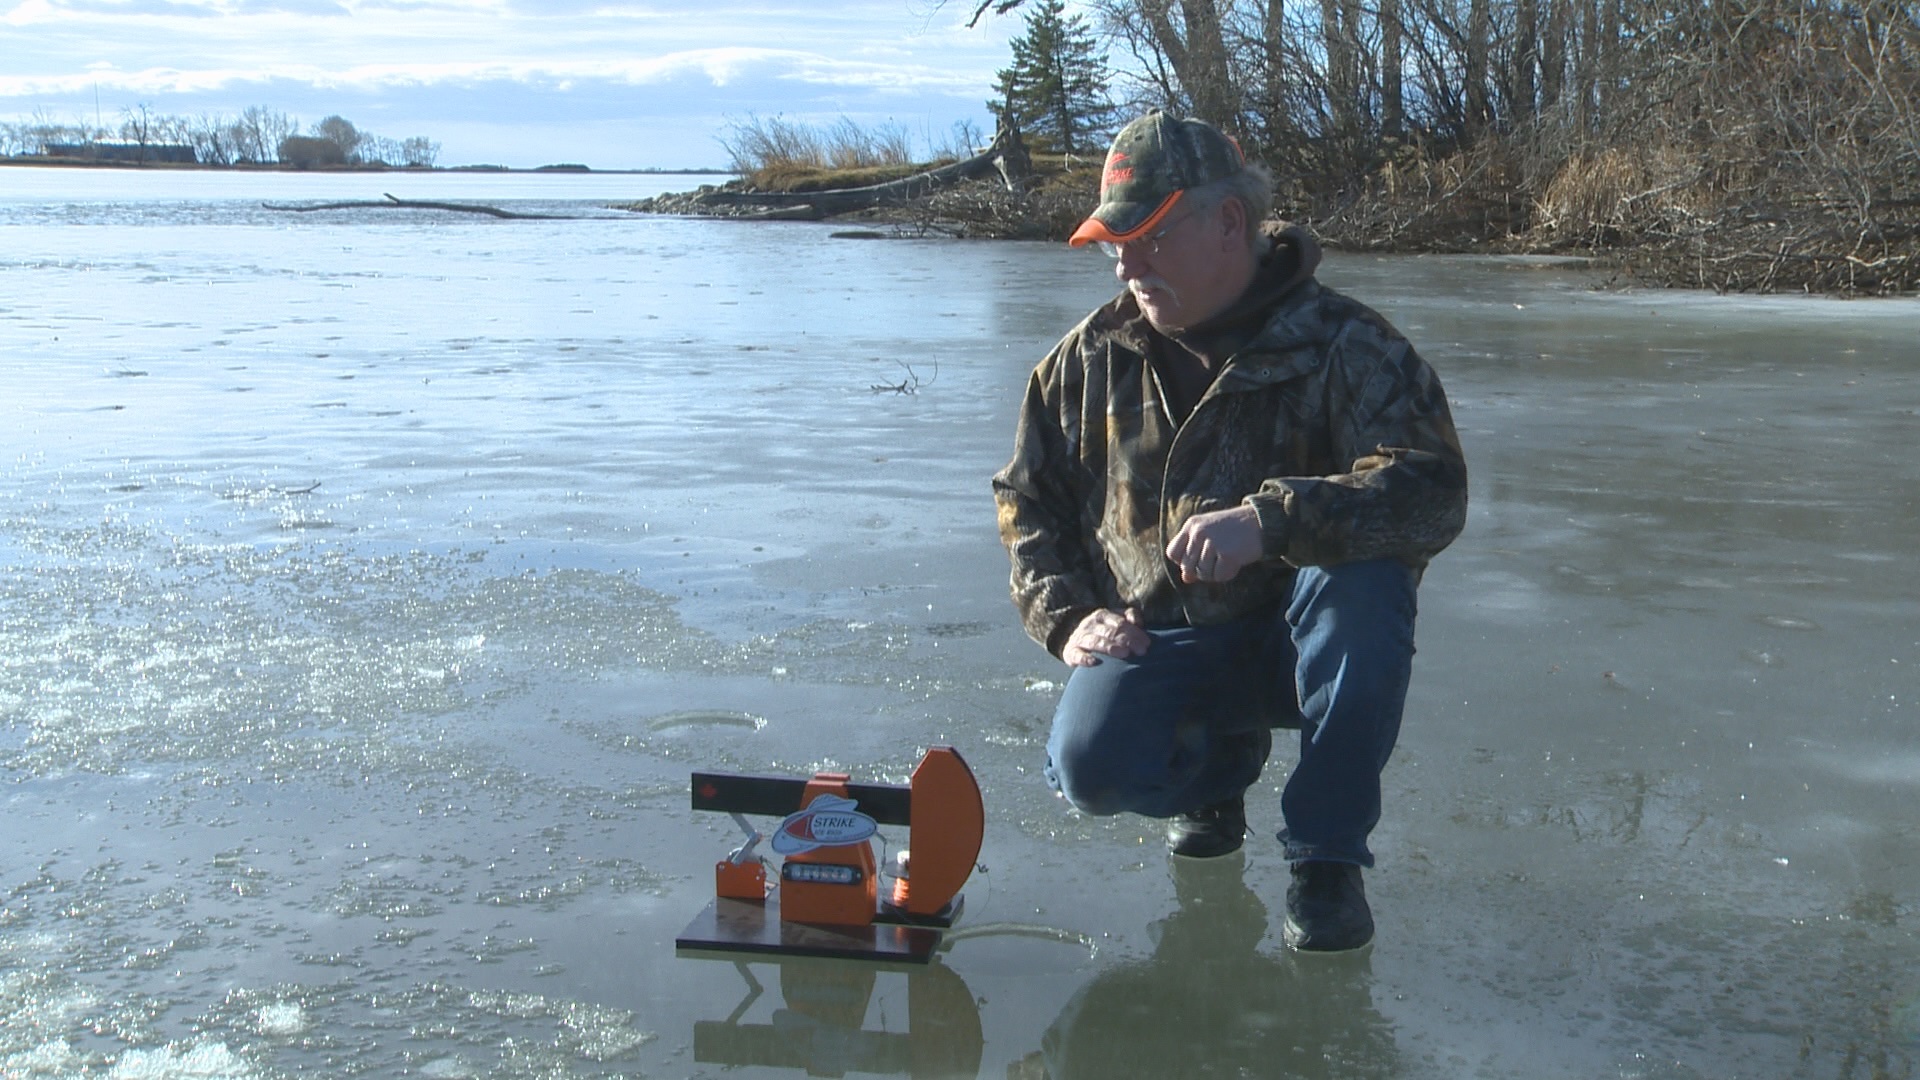 Ice fisher makes video about ice fishing rig, Internet can't get enough